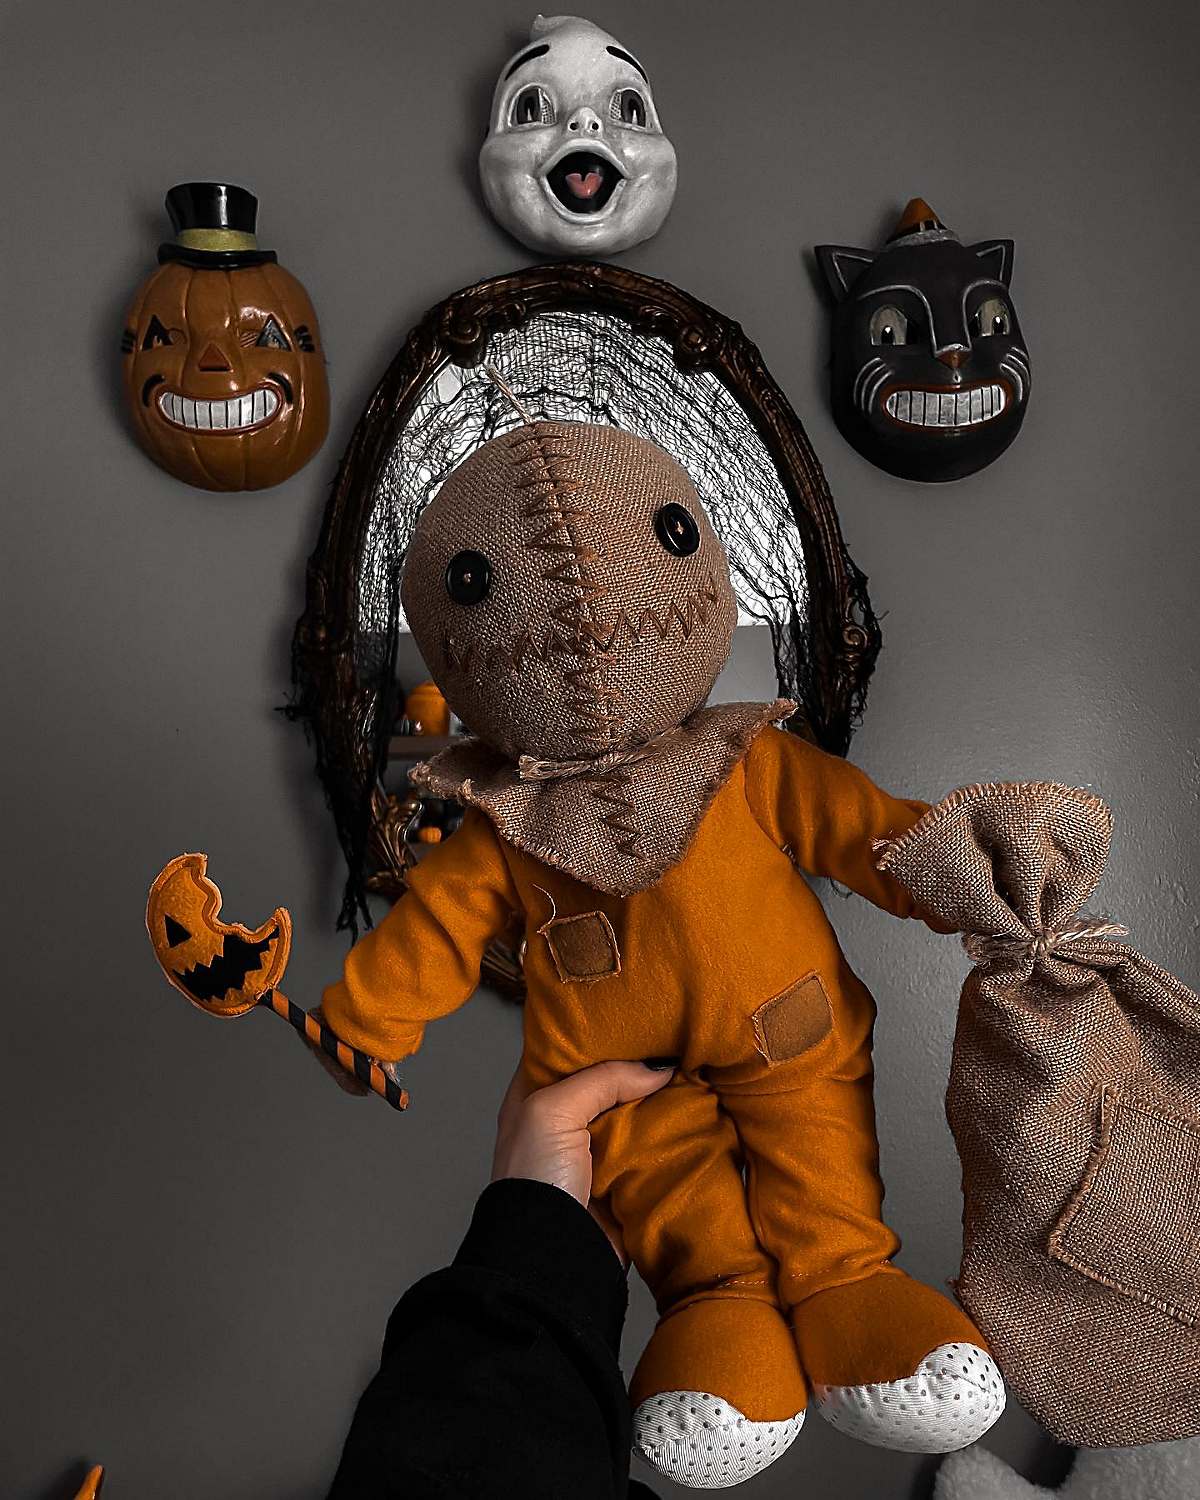 Sam Trick 'r Treat doll held up against wall featuring vintage Halloween masks